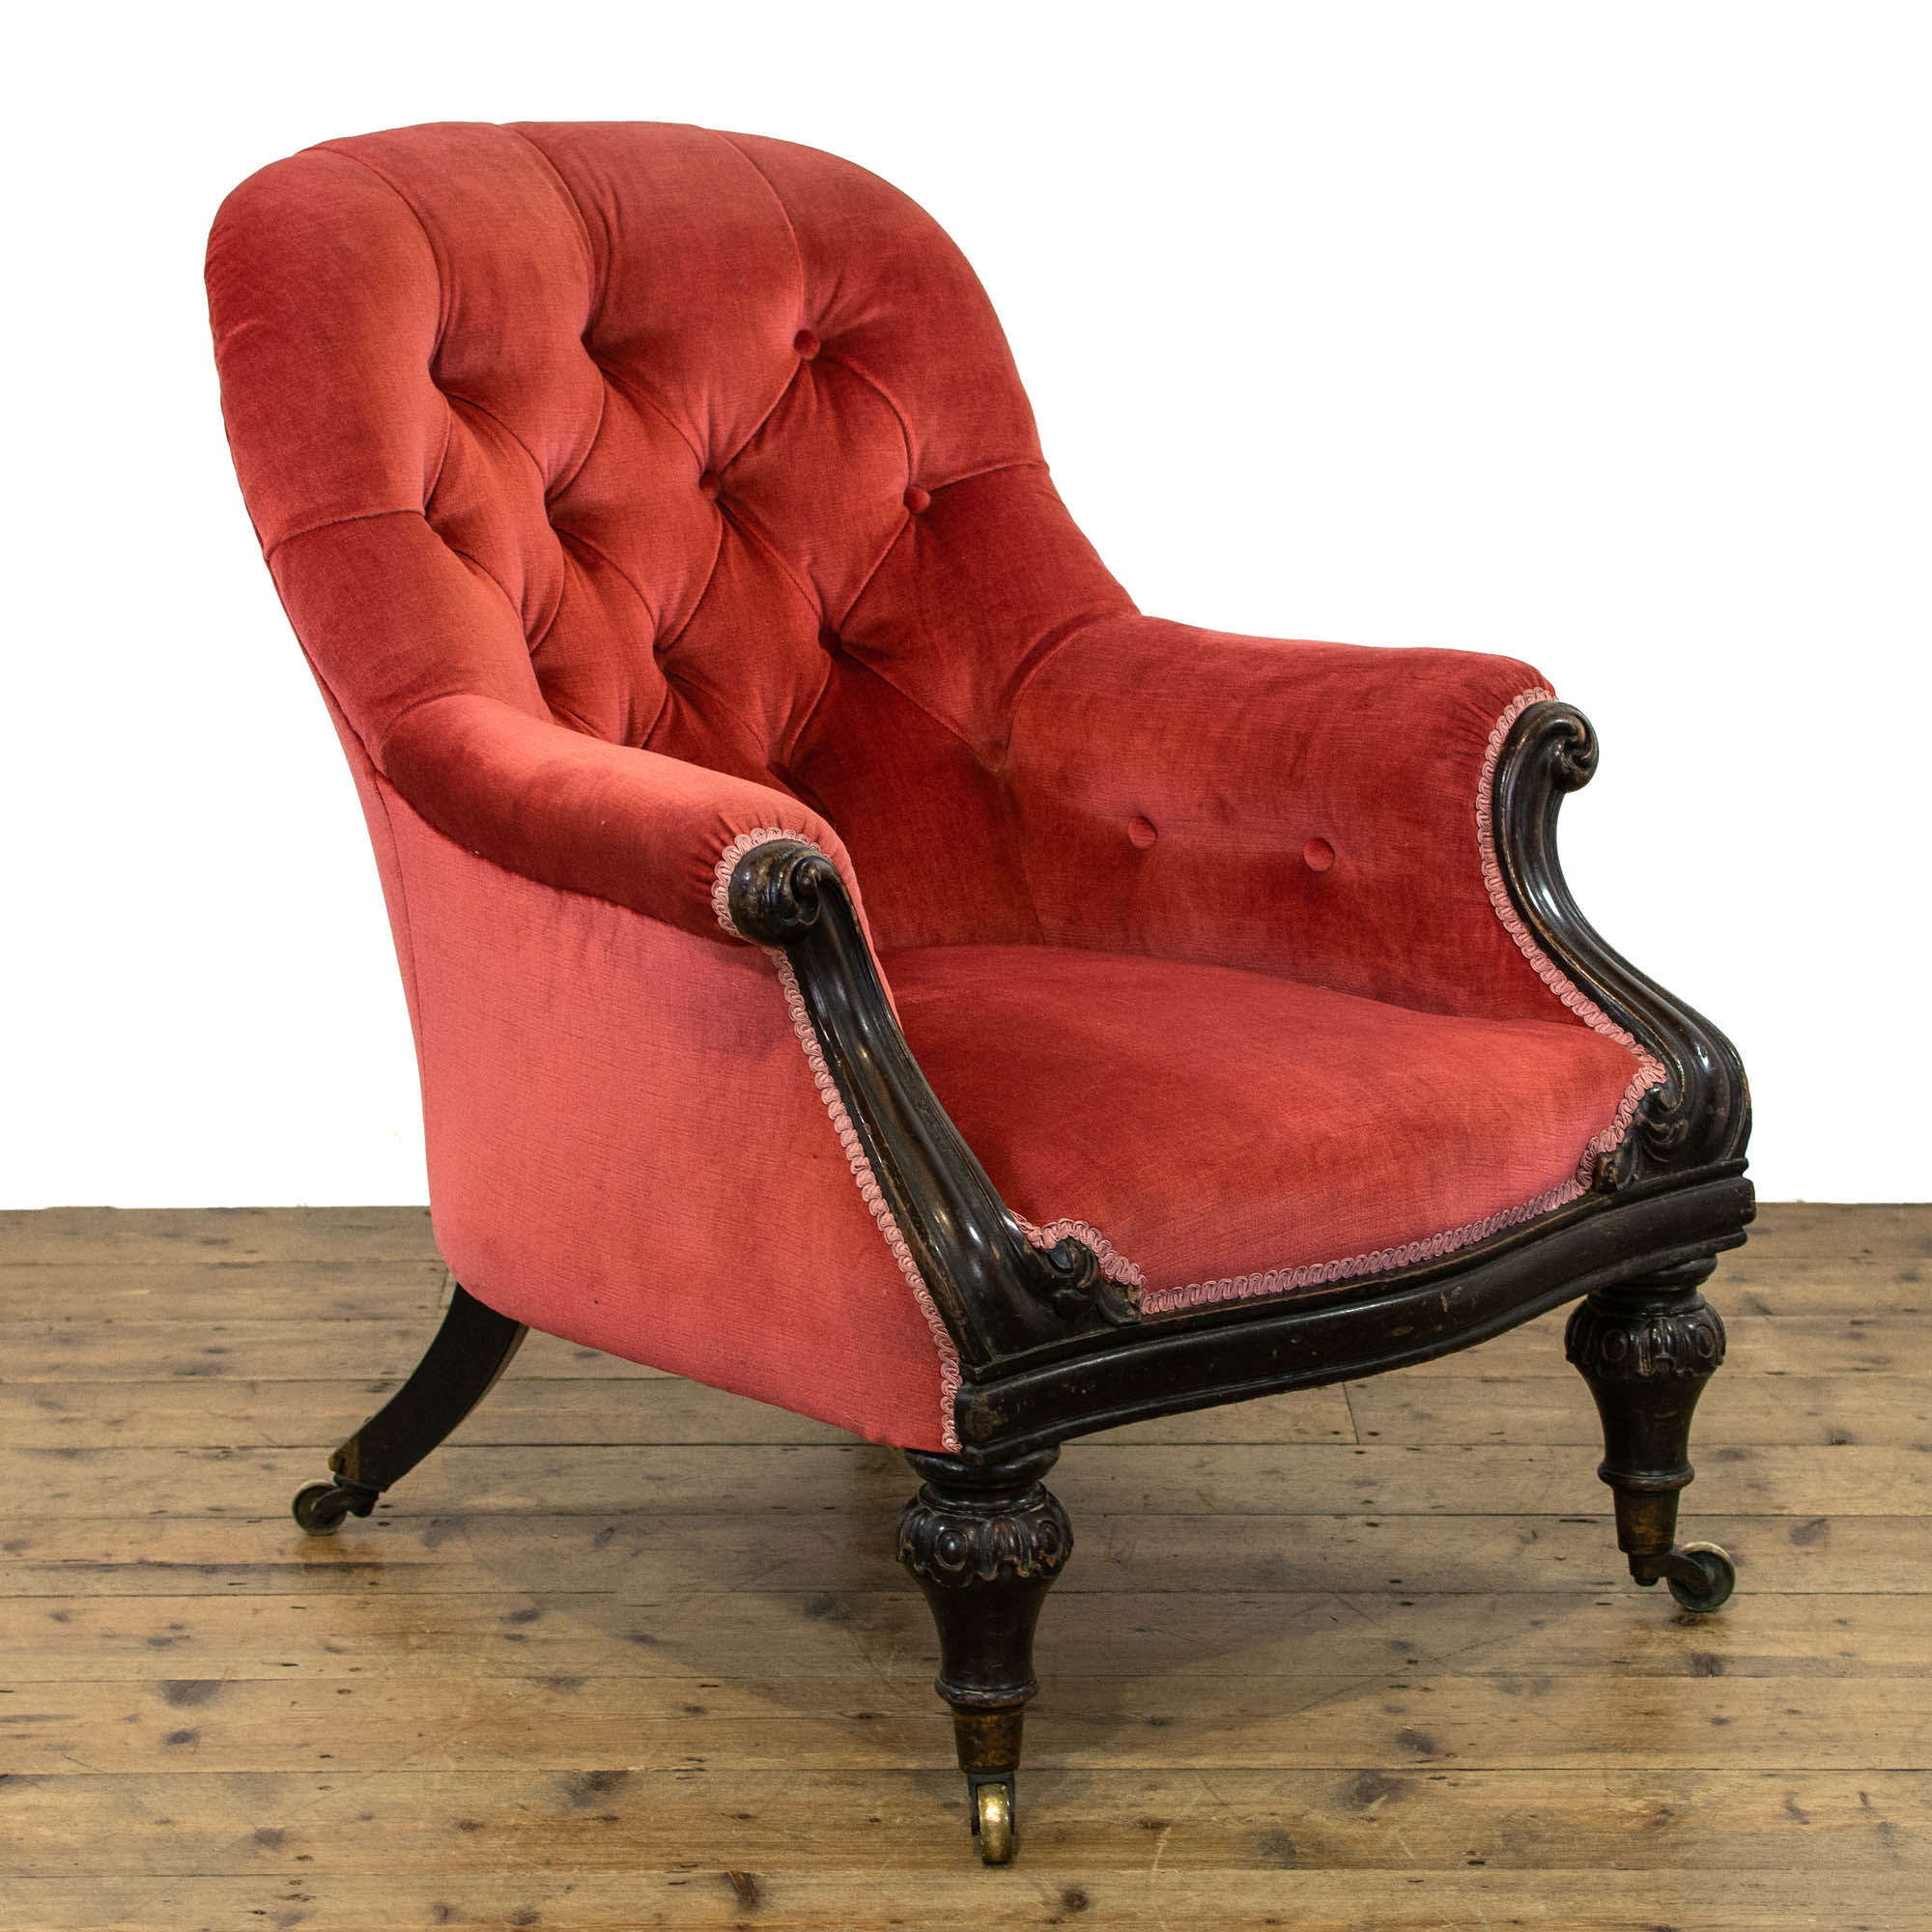 Victorian Antique Upholstered Armchair